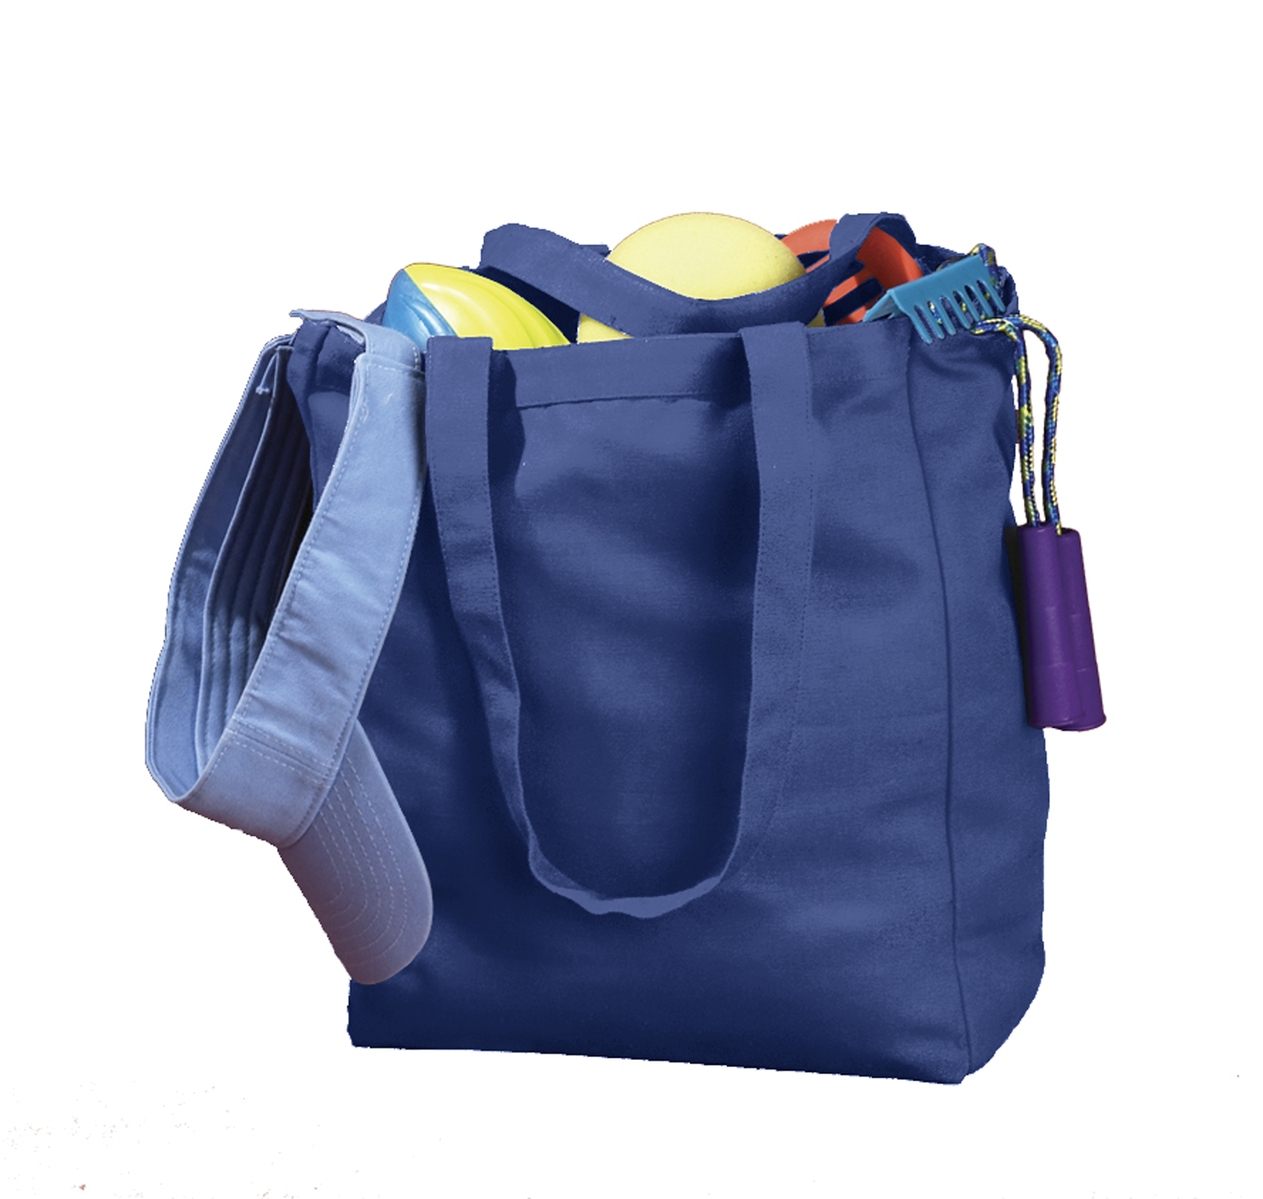 BAGedge BE008 12 oz. Canvas Book Tote $3.51 - Bags